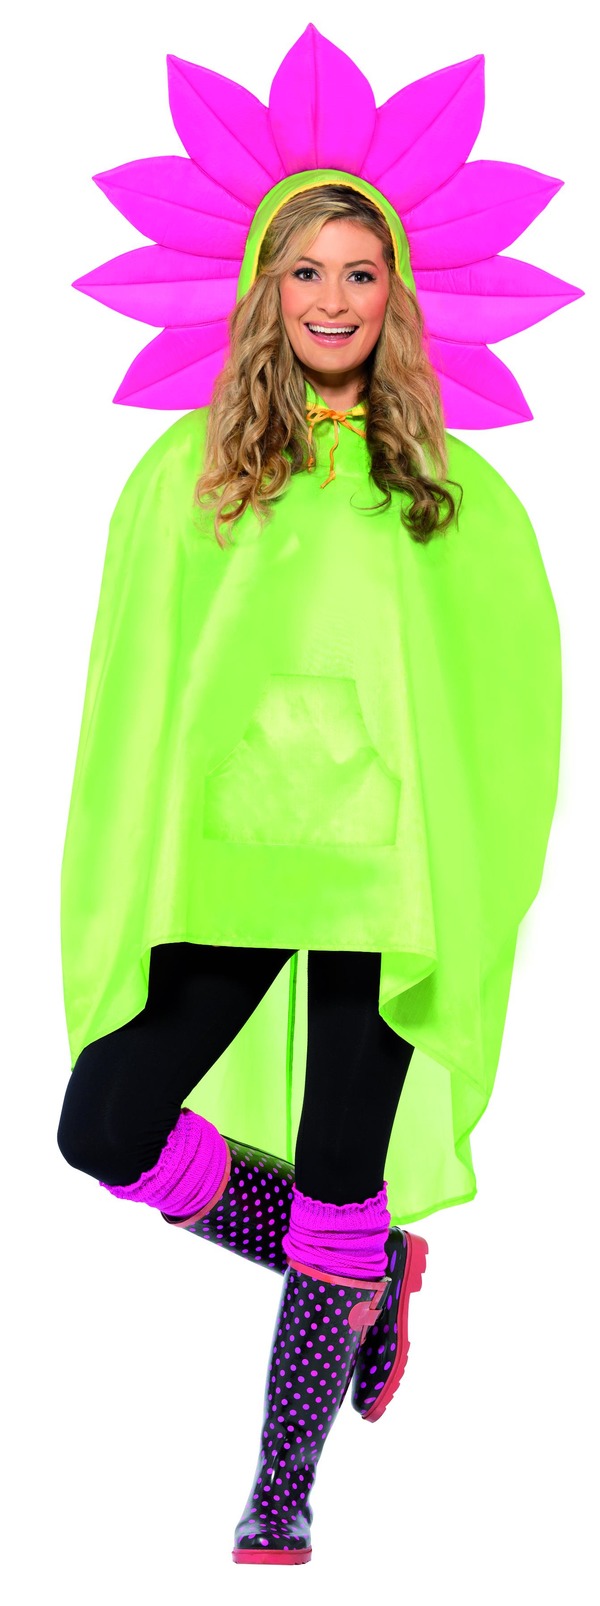 Flower Party Poncho, Green, with Drawstring Bag